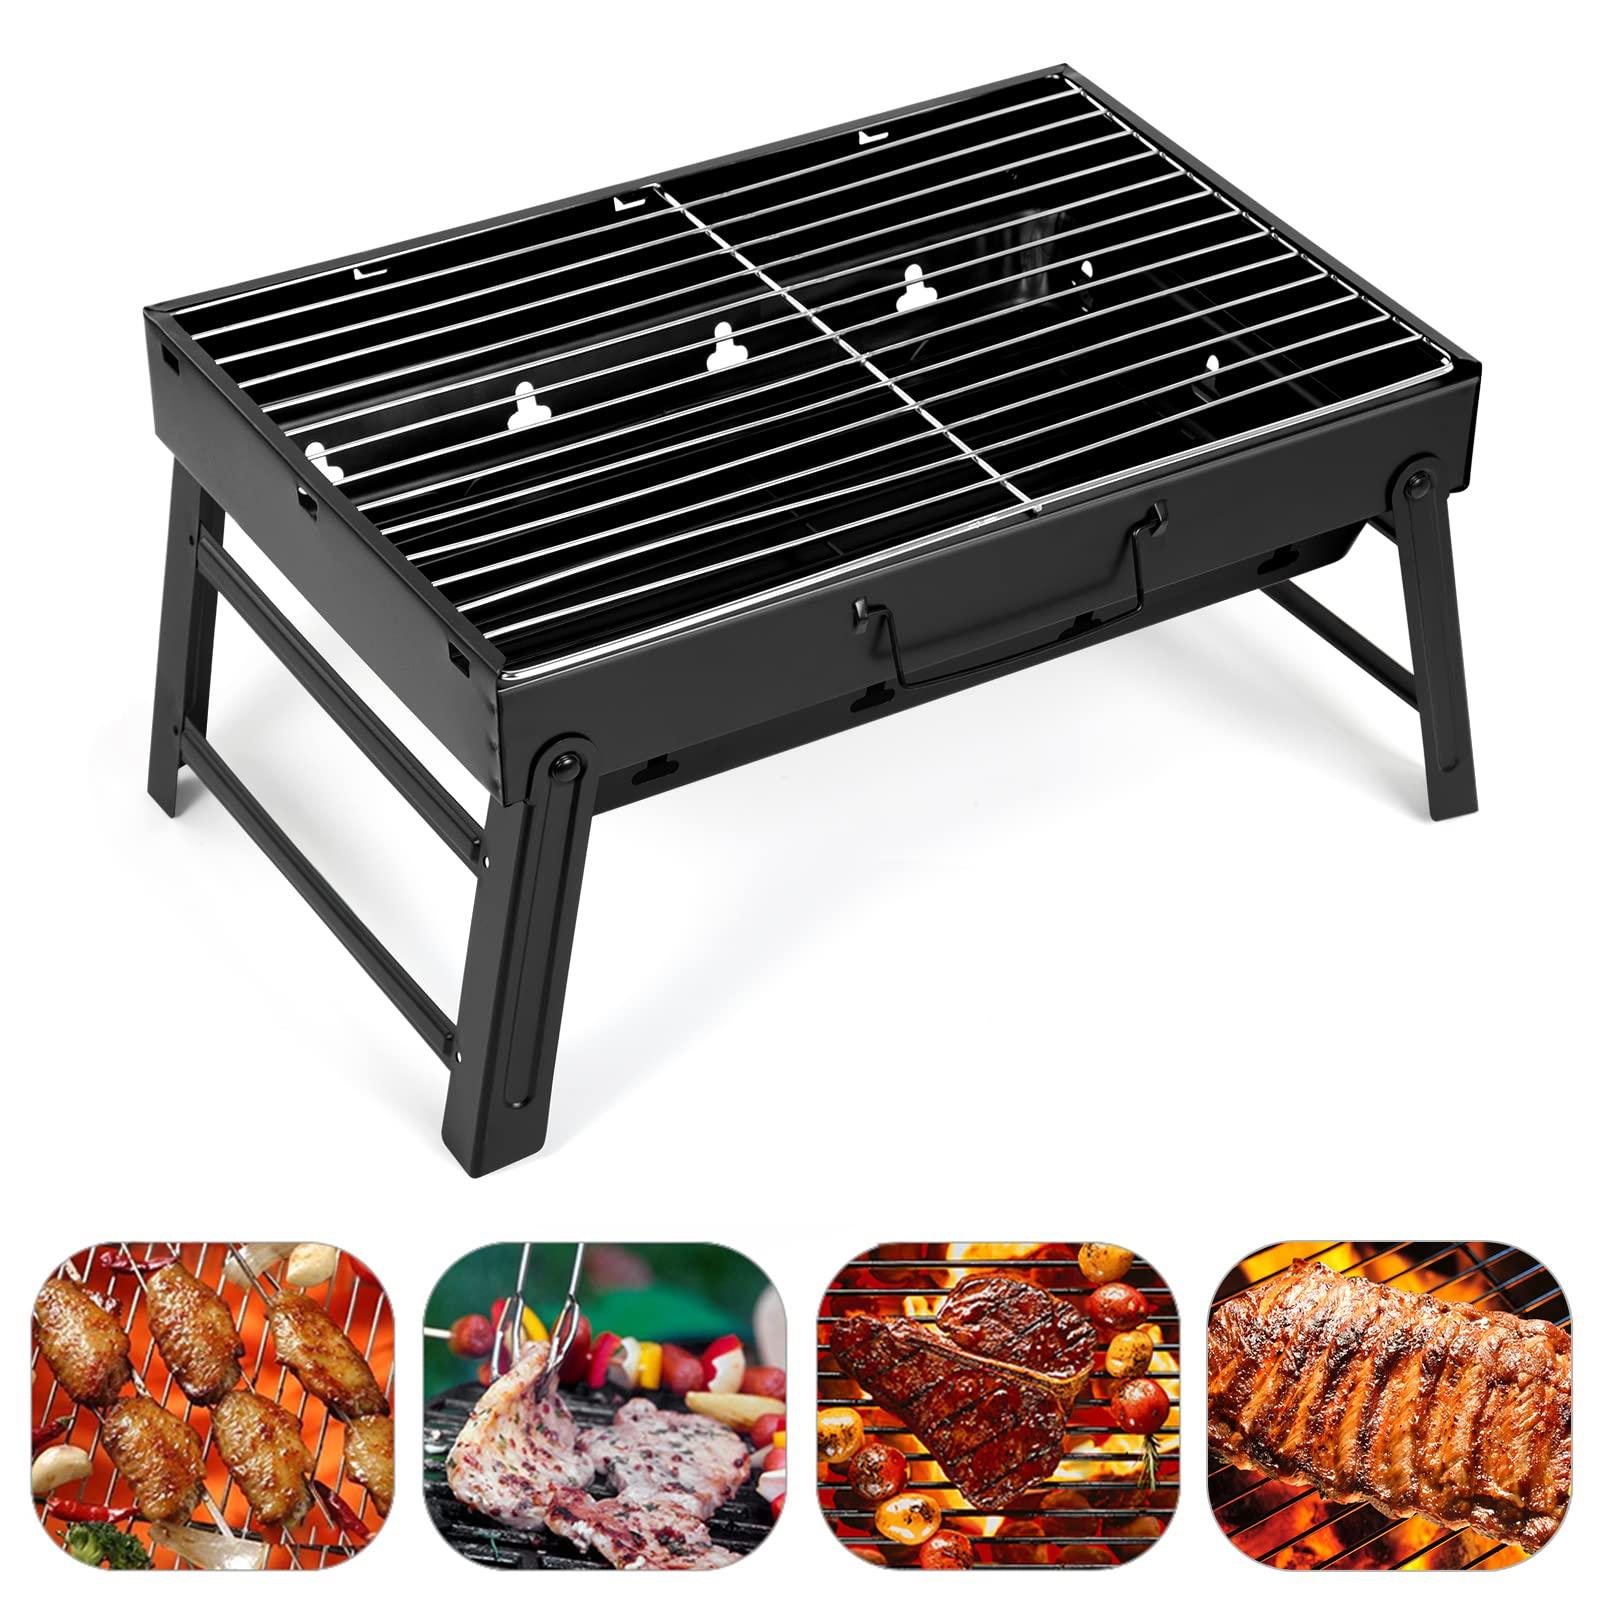 Barbecue Grill, Charcoal Grill Folding Portable Lightweight Barbecue Grill Tools for Outdoor Grilling Cooking Camping Hiking Picnics Tailgating Backpacking Party (Medium) - CookCave